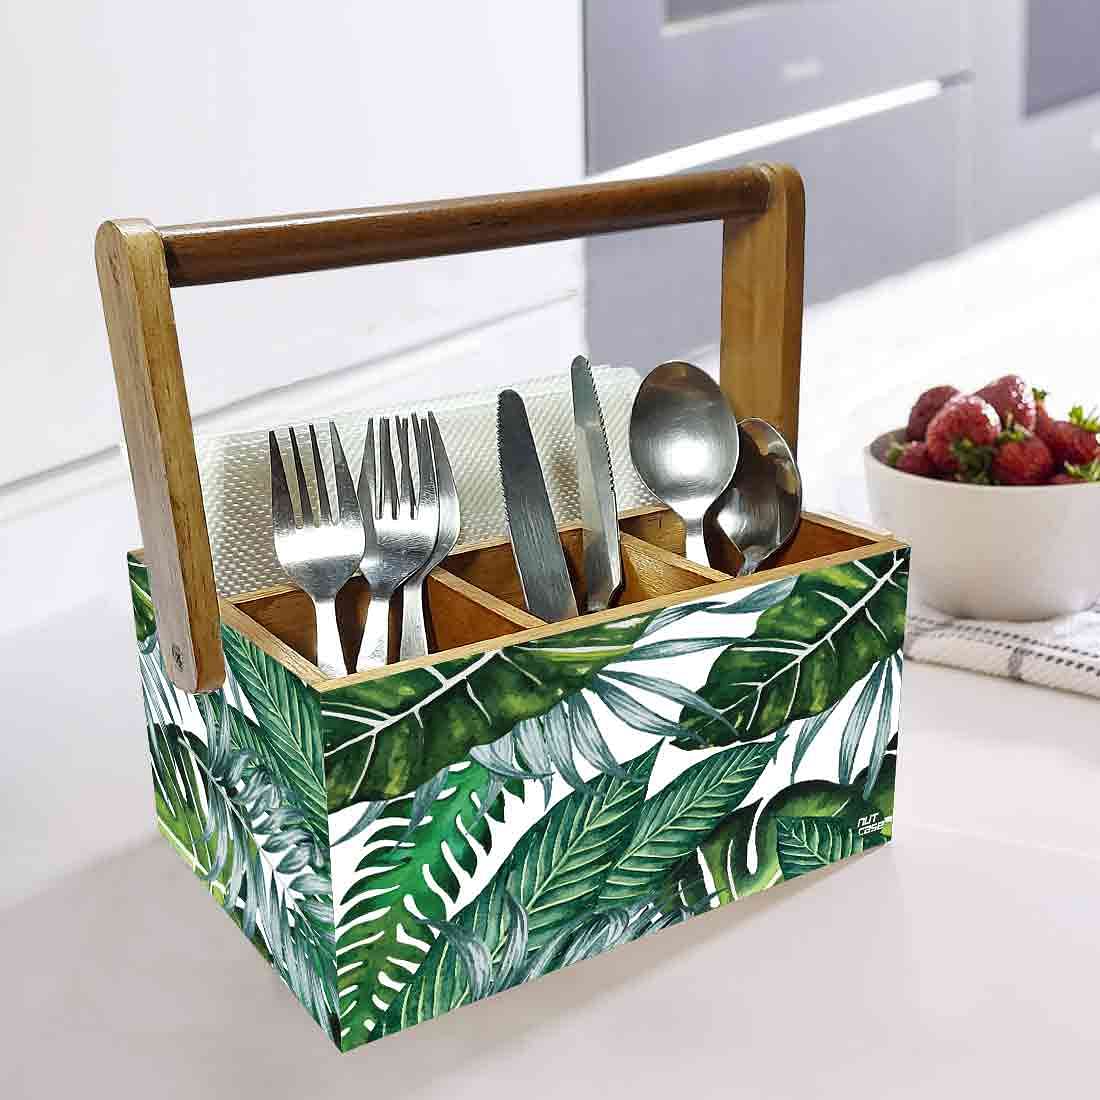 Restaurant Silverware Holder With Handle for Spoons Tissue Organizer - Leaves Nutcase